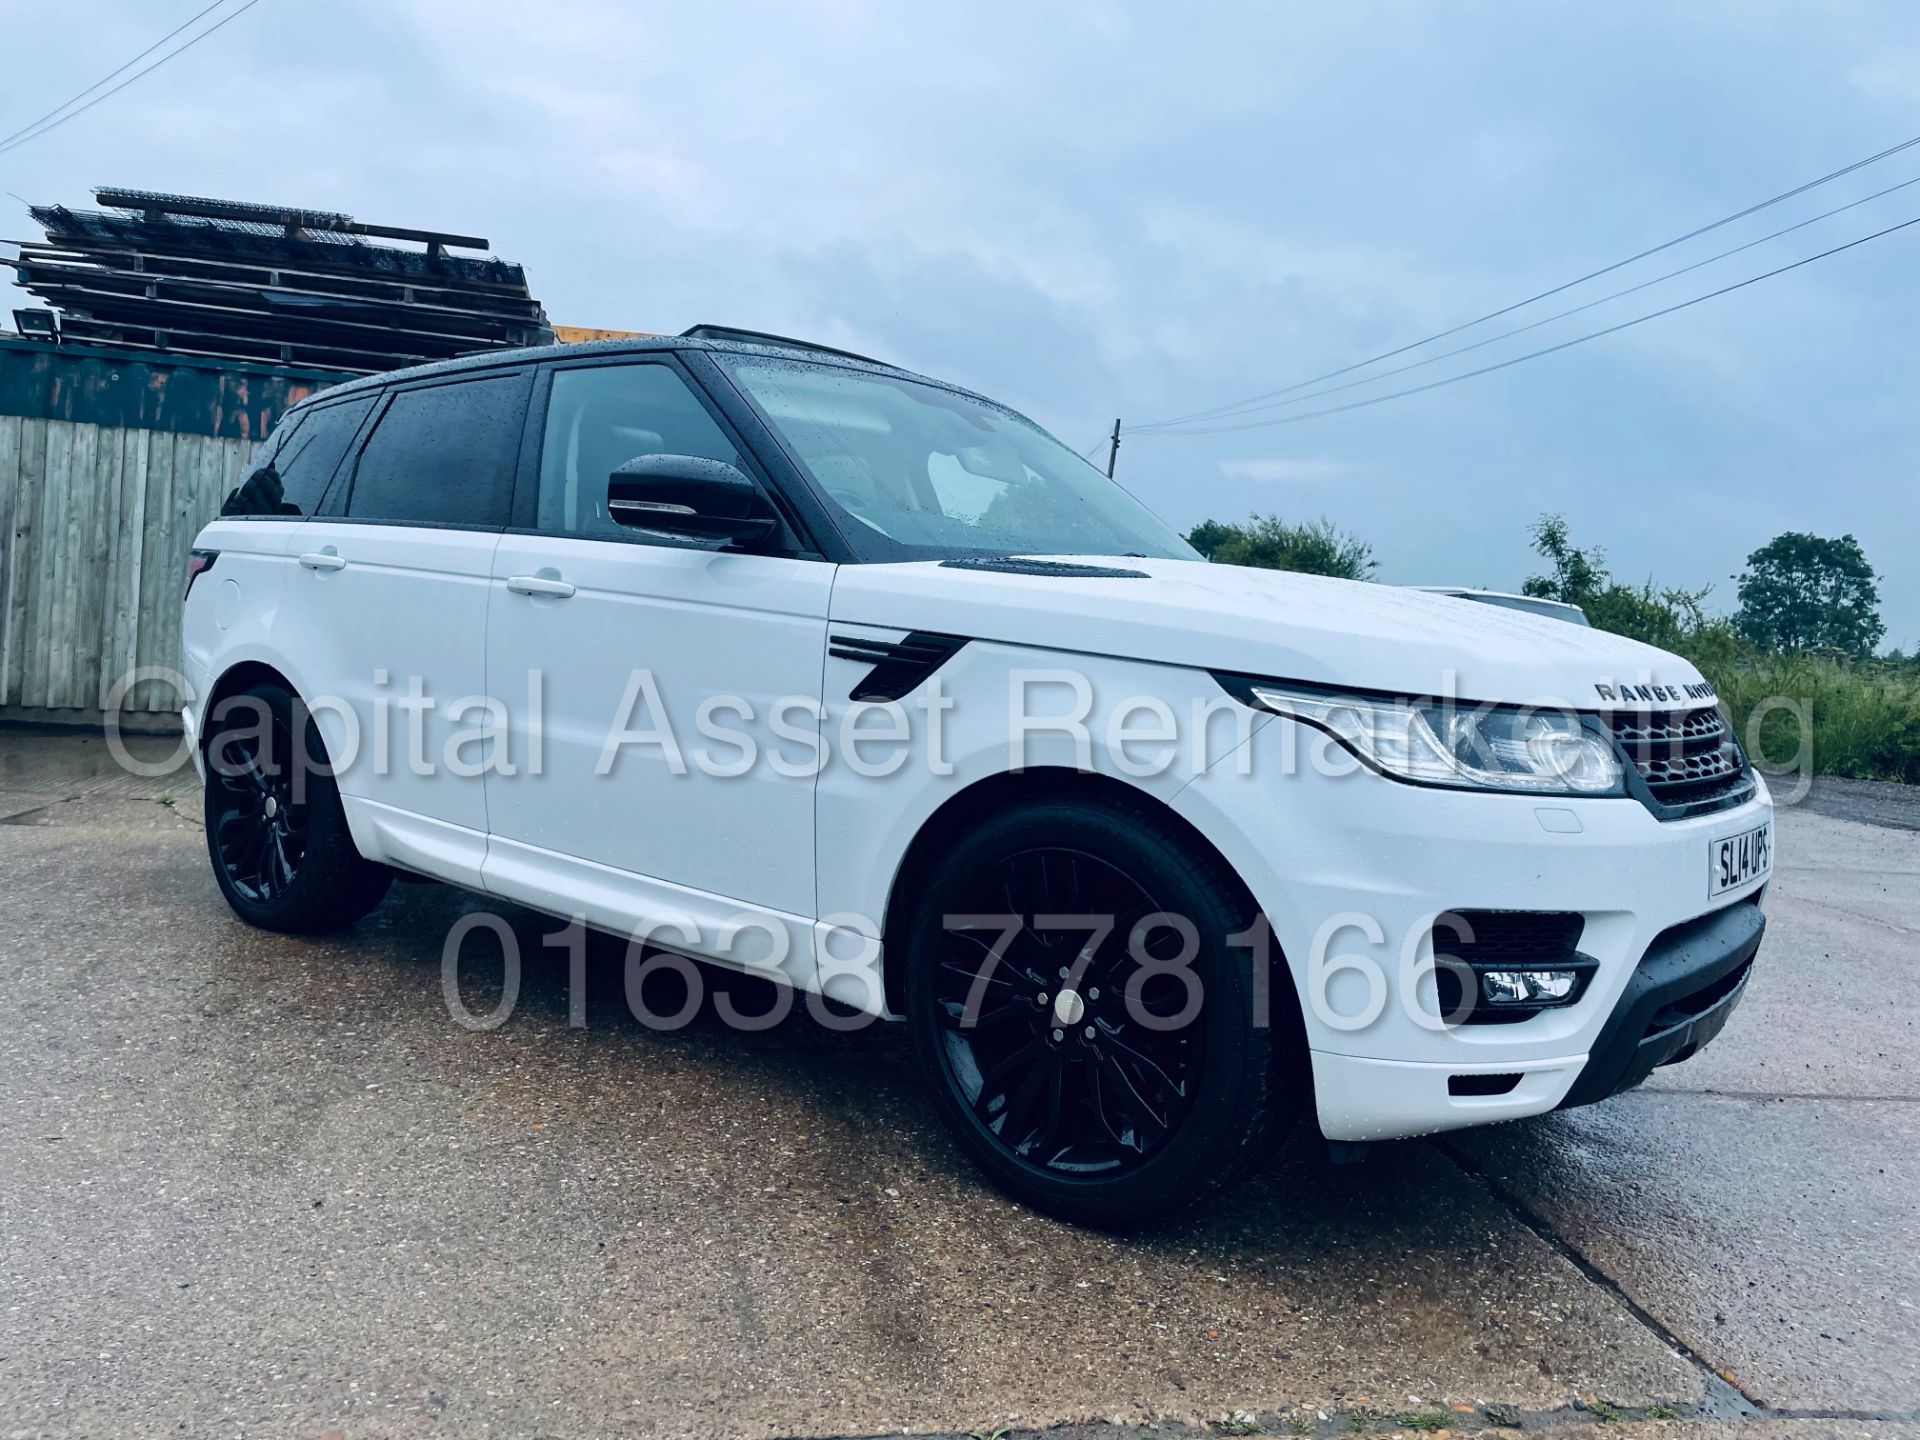 On Sale RANGE ROVER SPORT *SPECIAL EDITION* (2014) '3.0 TDV6 - AUTO' *SAT NAV & PAN ROOF* (TOP SPEC) - Image 12 of 54